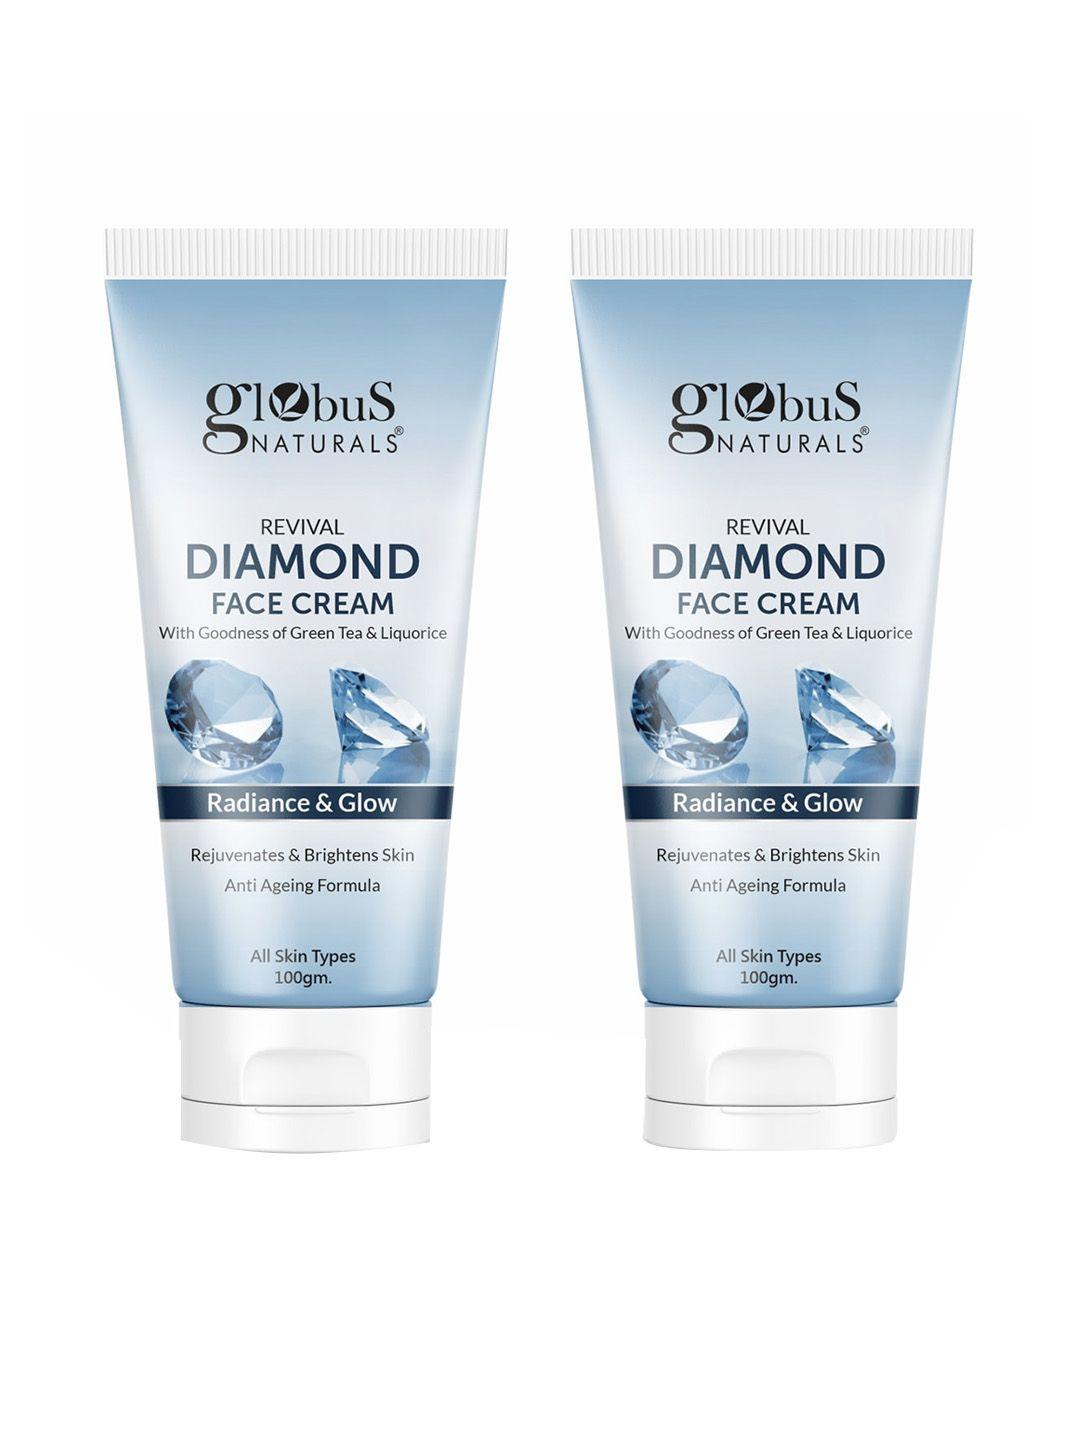 globus naturals revival set of 2 diamond face cream for soft & glowing skin 100 g each